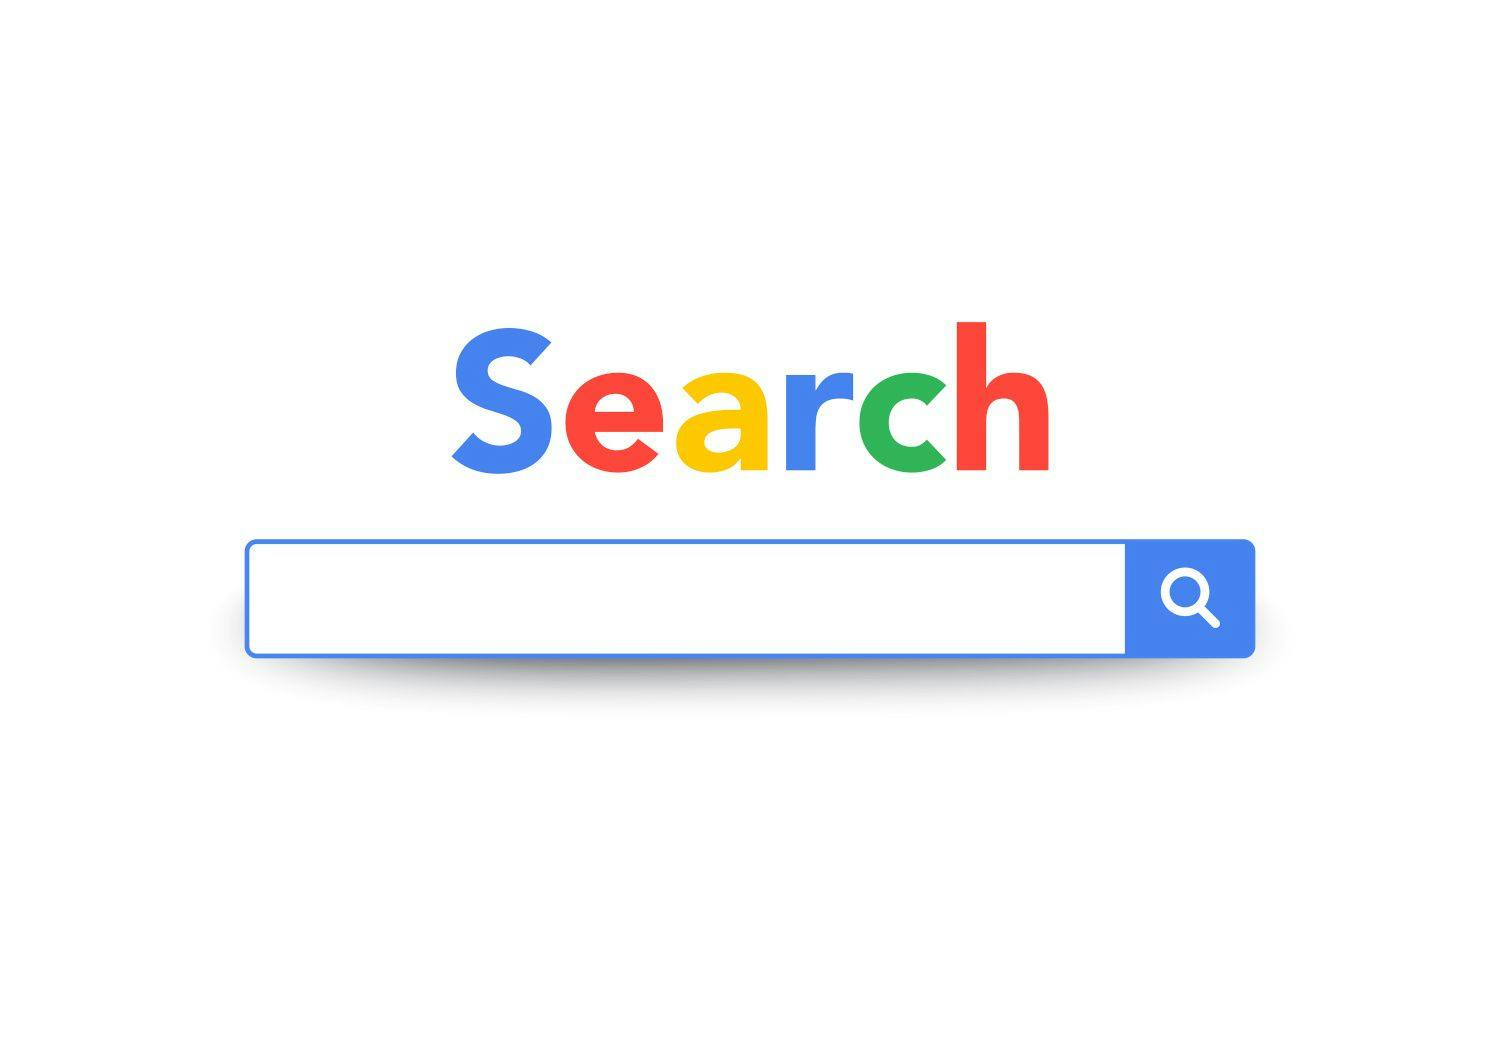 Search engine search bar